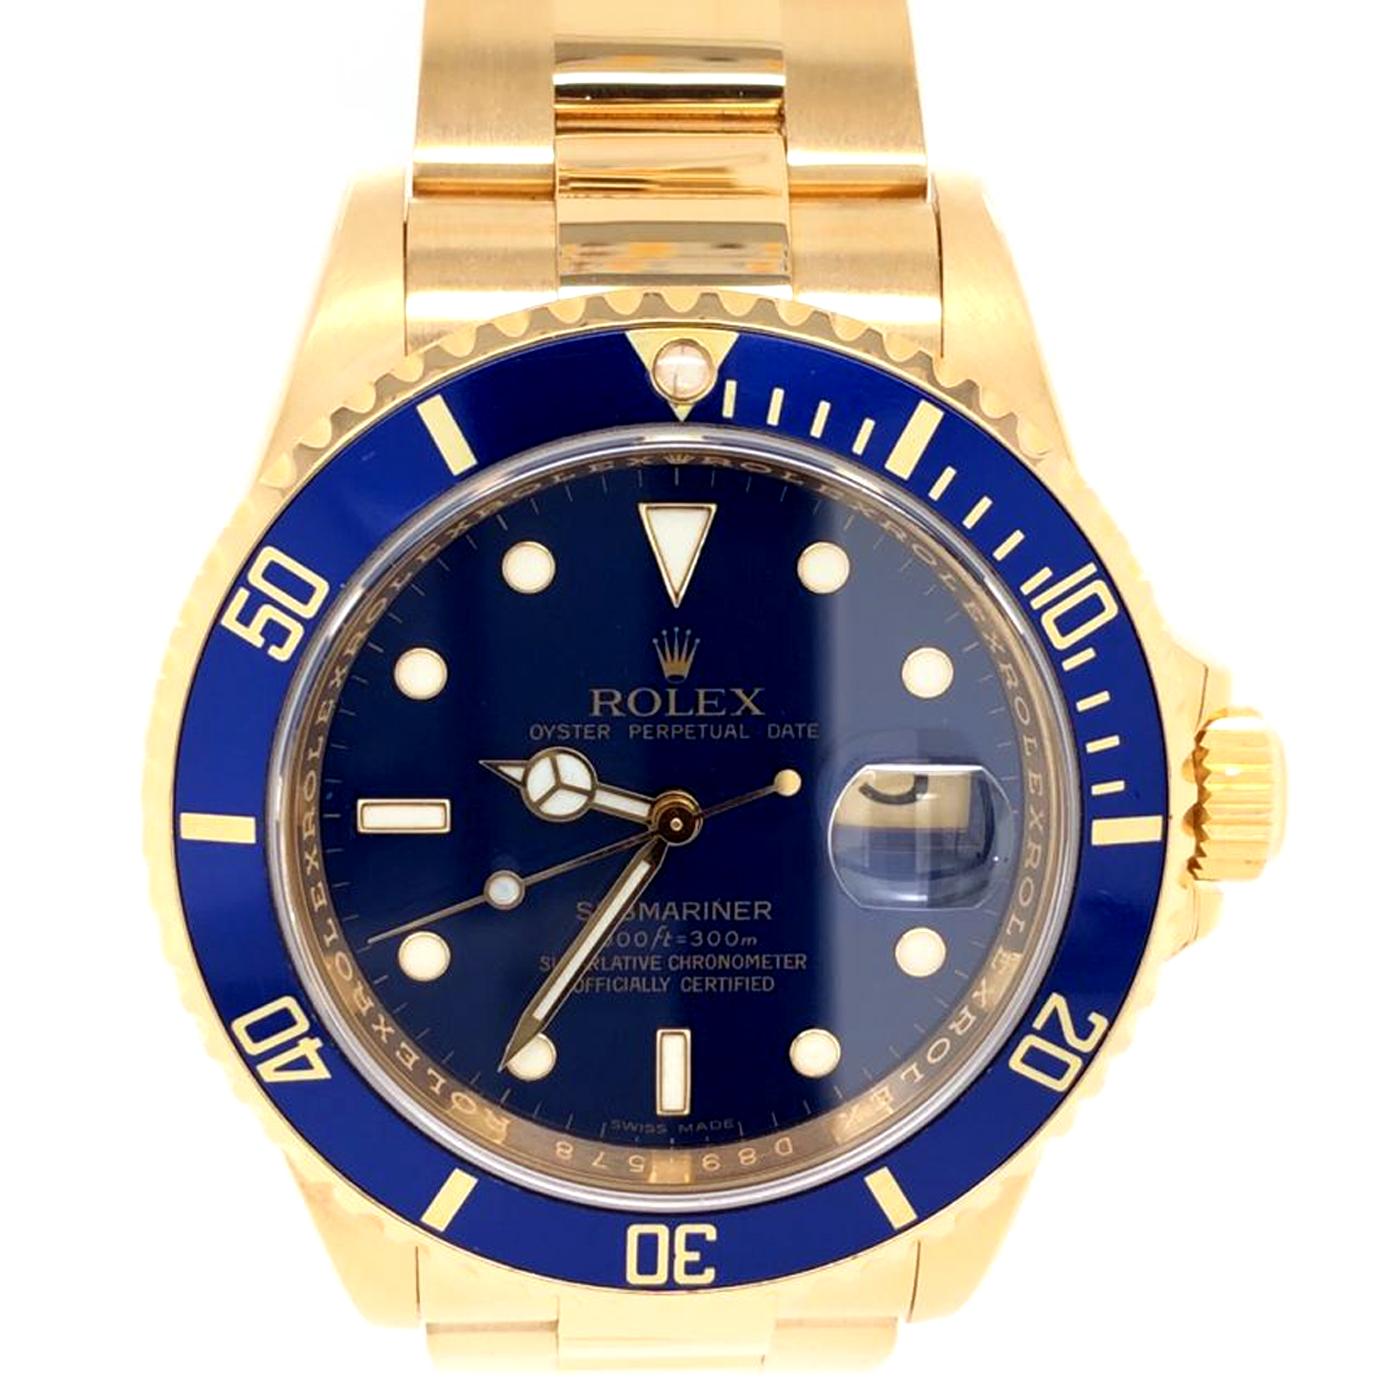 This Rolex Submariner has been polished and is in great cosmetic and mechanic condition, Blue Dial with Luminescent Hour Markers, Sweep Second Hand, Date Indicator, Quickset Movement, Rotating Drivers Bezel and Sapphire Crystal, Matching 18K yellow